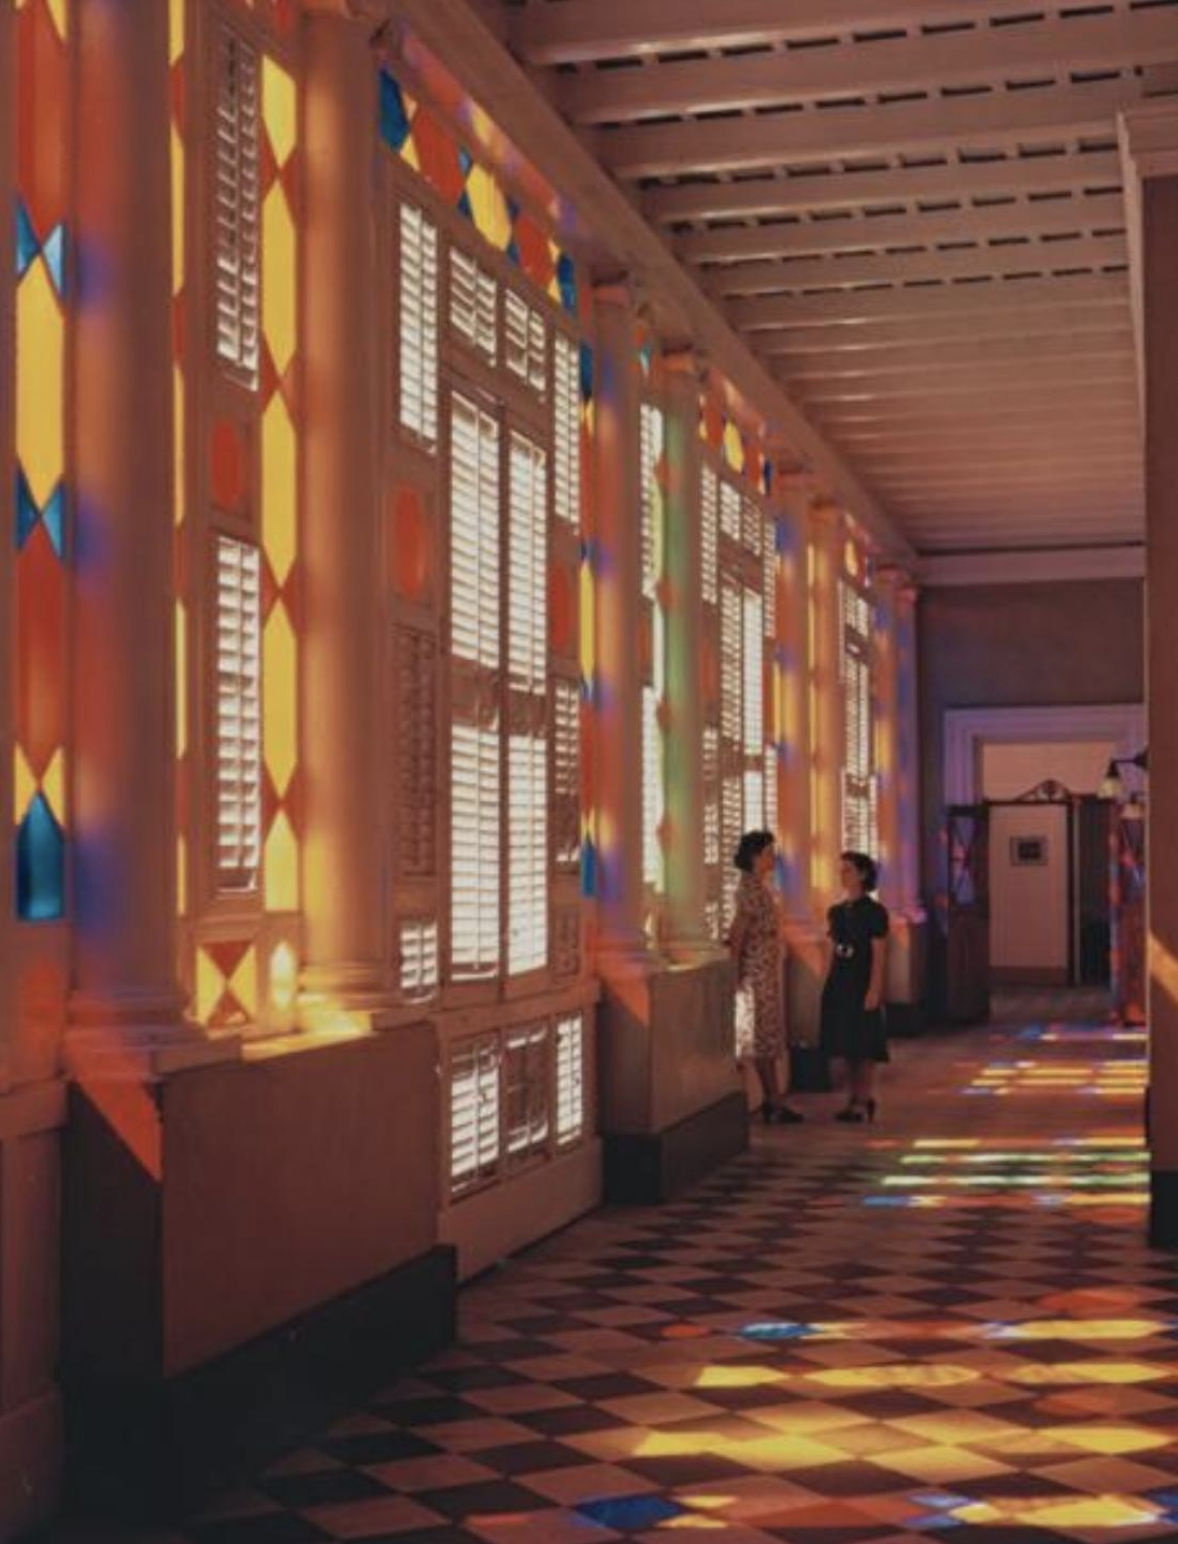 This image depicts deeply saturated stained glass windows leaking into the light in a building in Puerto Rico. Two women stand in the background.